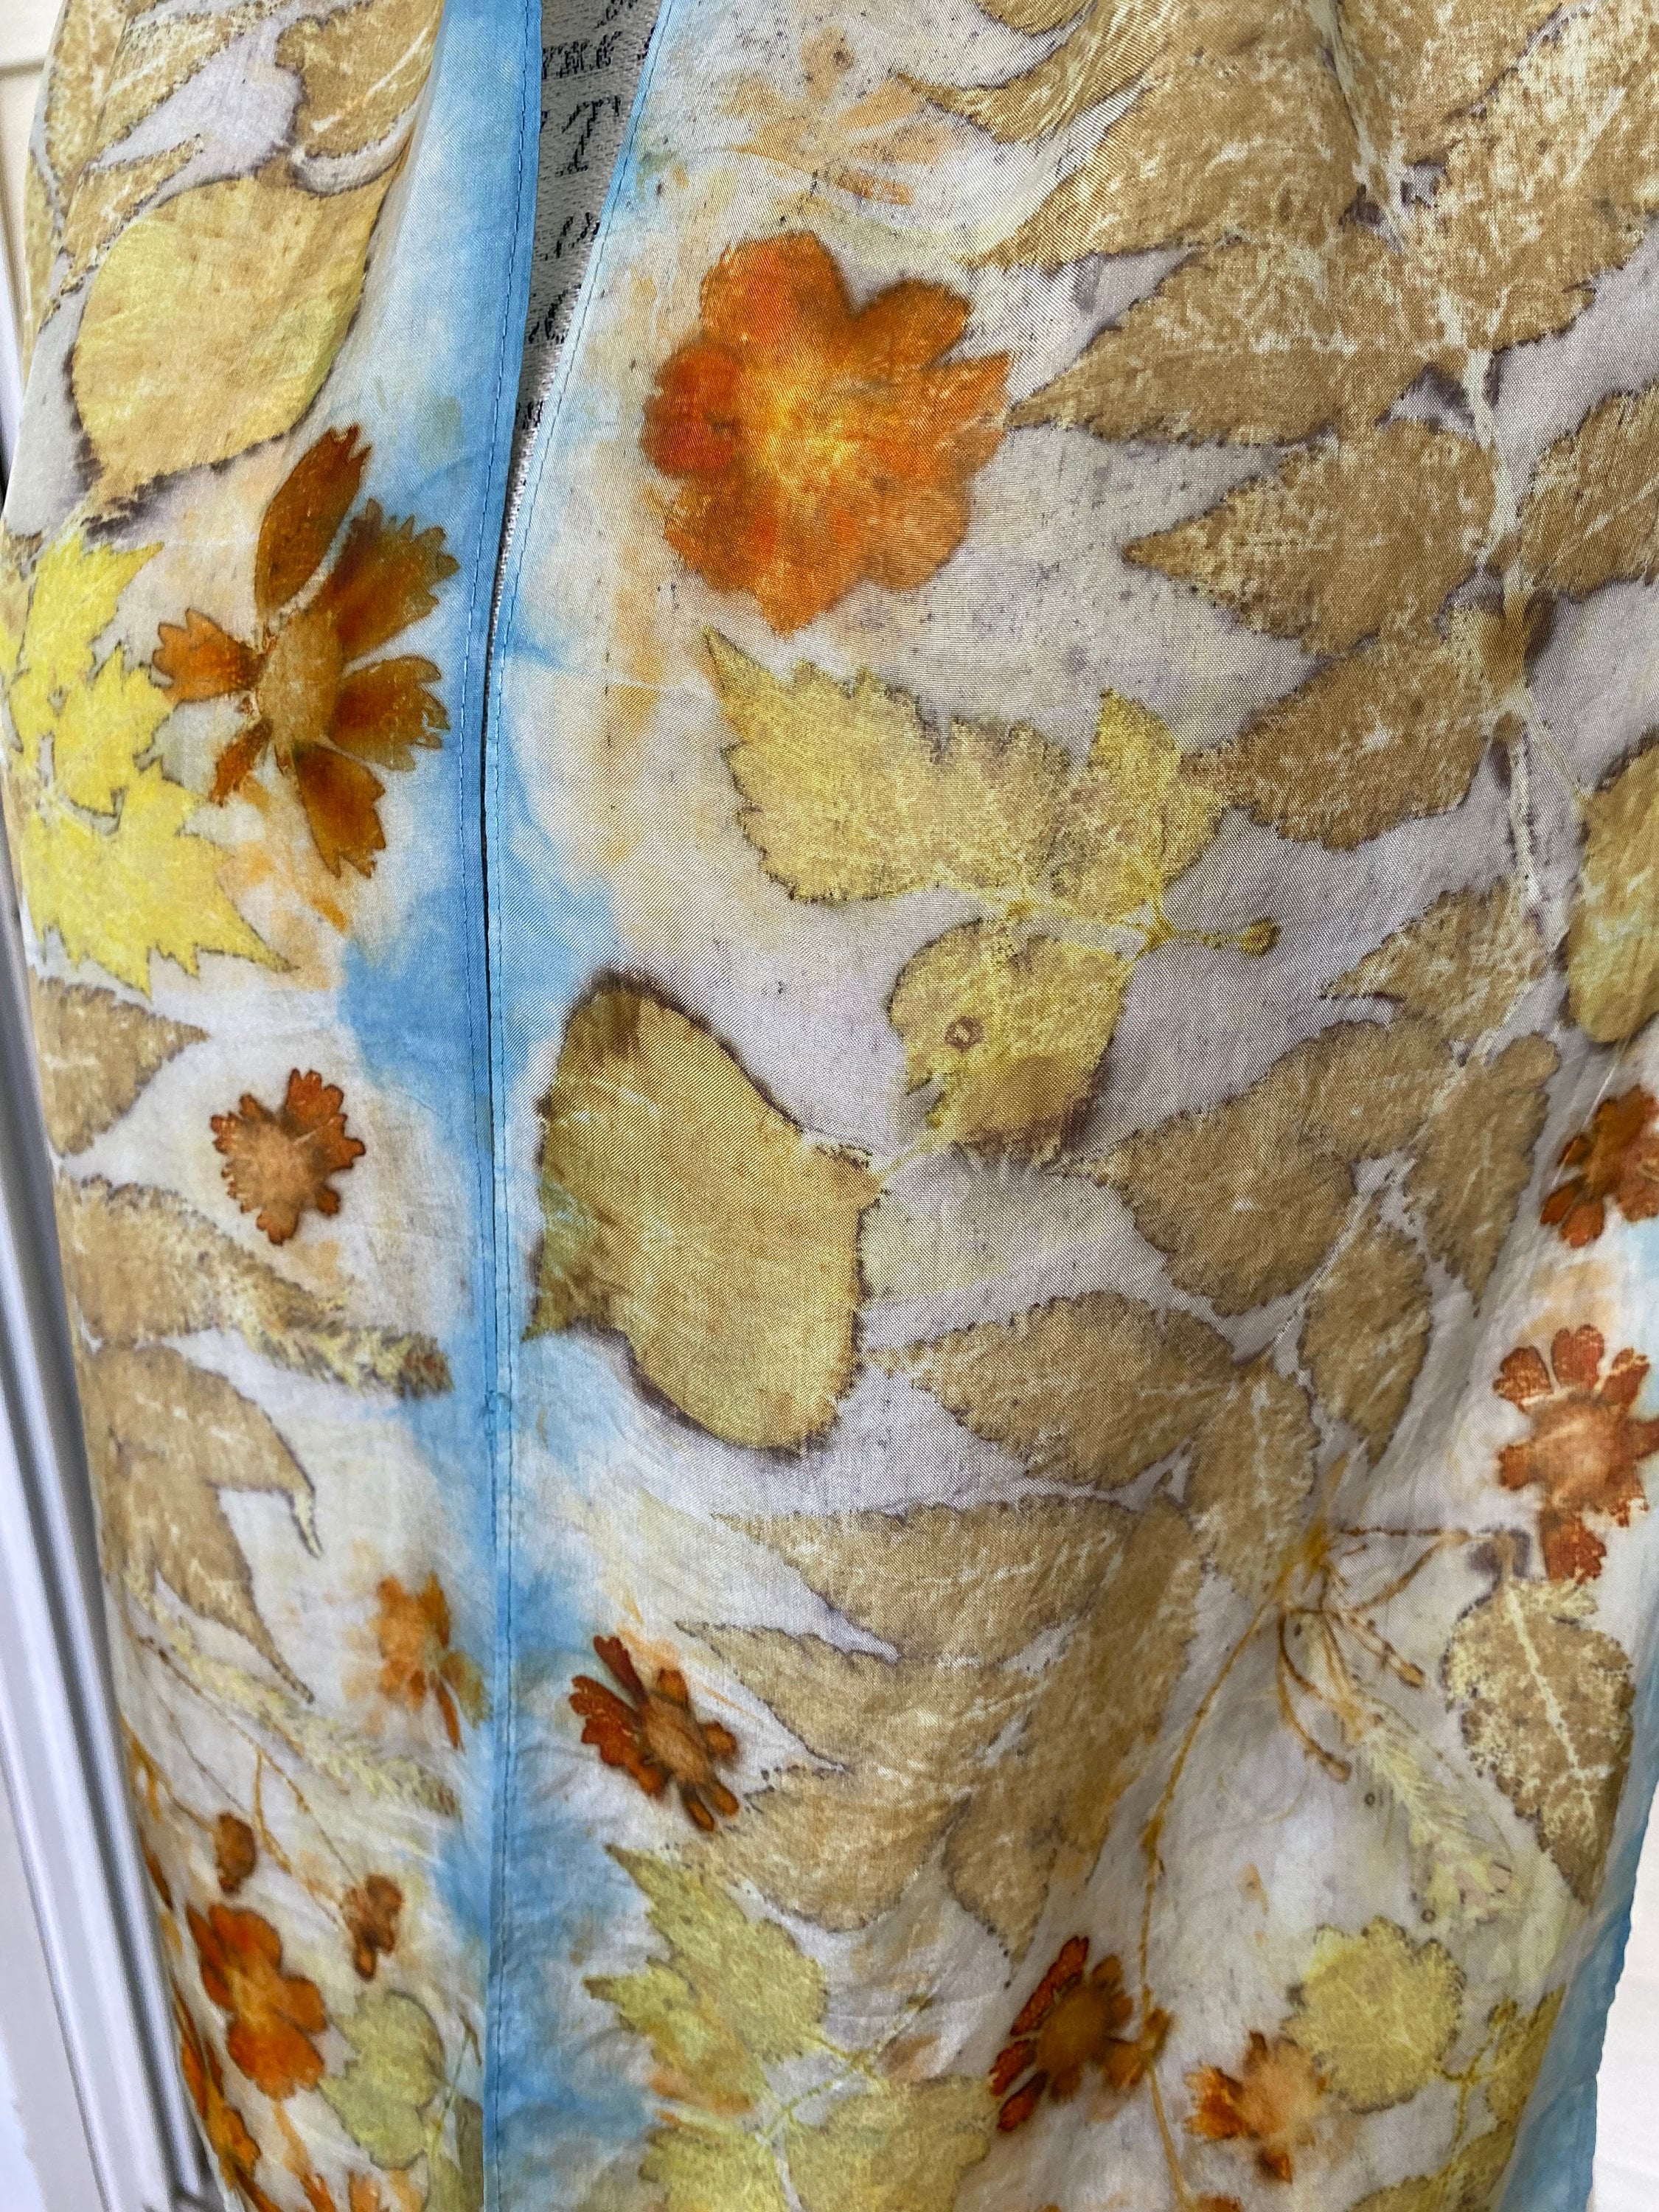 Citrine Shimmer Eco Printed Silk Scarf from The Catalyn